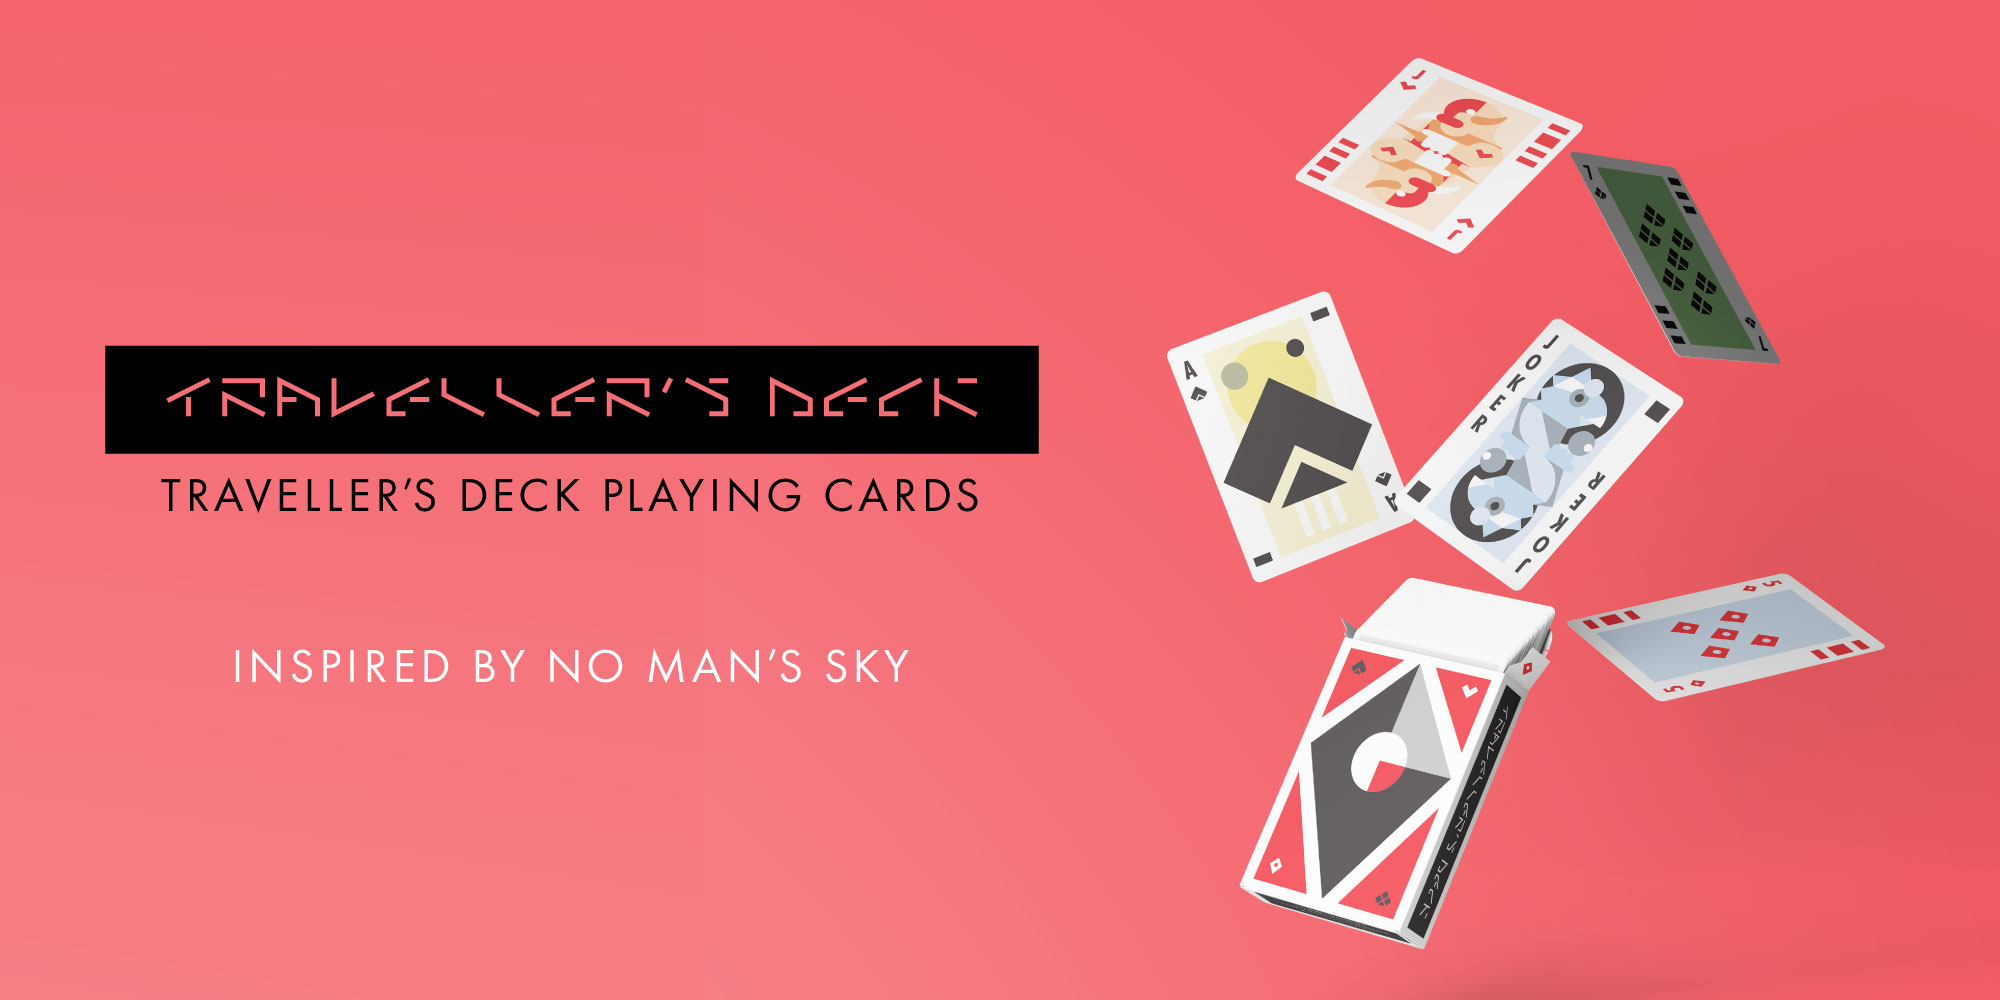 Traveller's Deck Playing Cards, Inspired by No Man's Sky